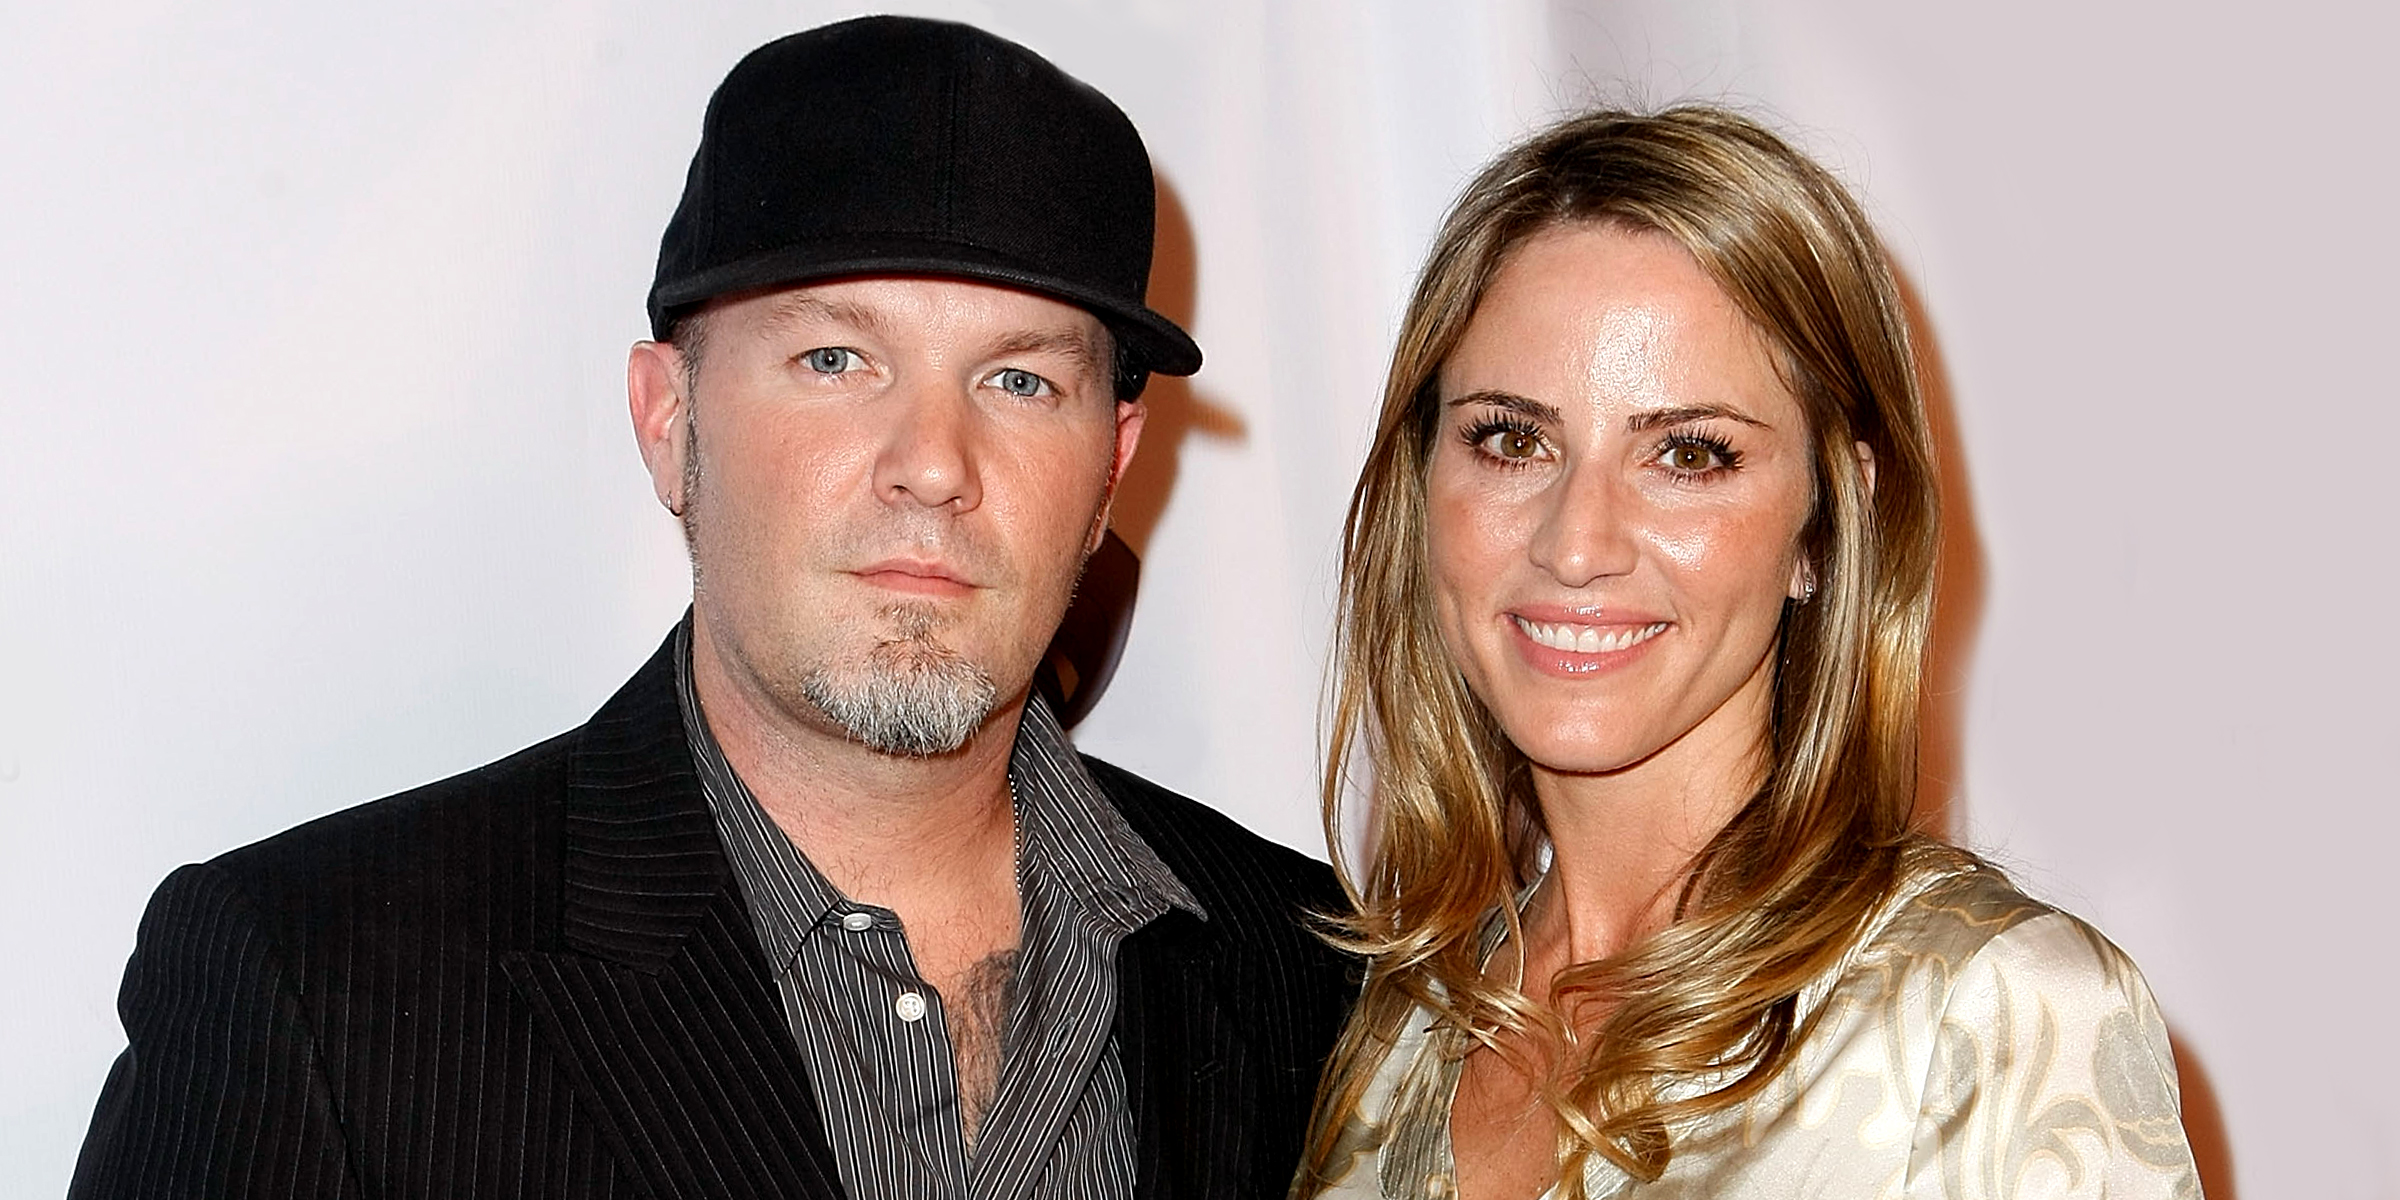 Fred Durst and Esther Nazarov | Source: Getty Images